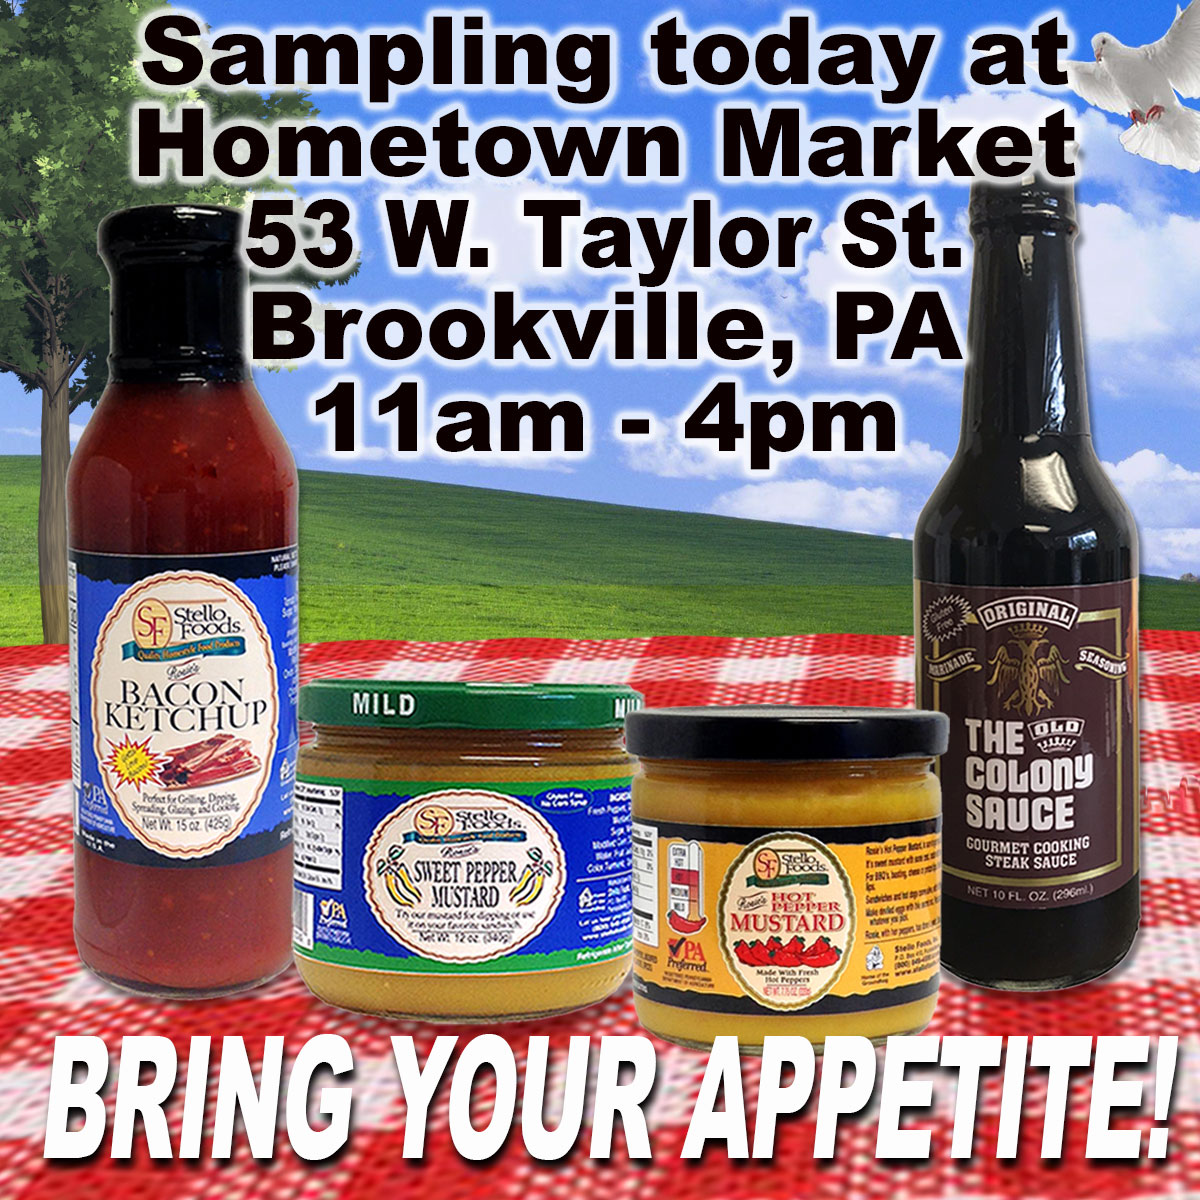 Food Sampling today at Hometown Markets in Brookville, PA!!!